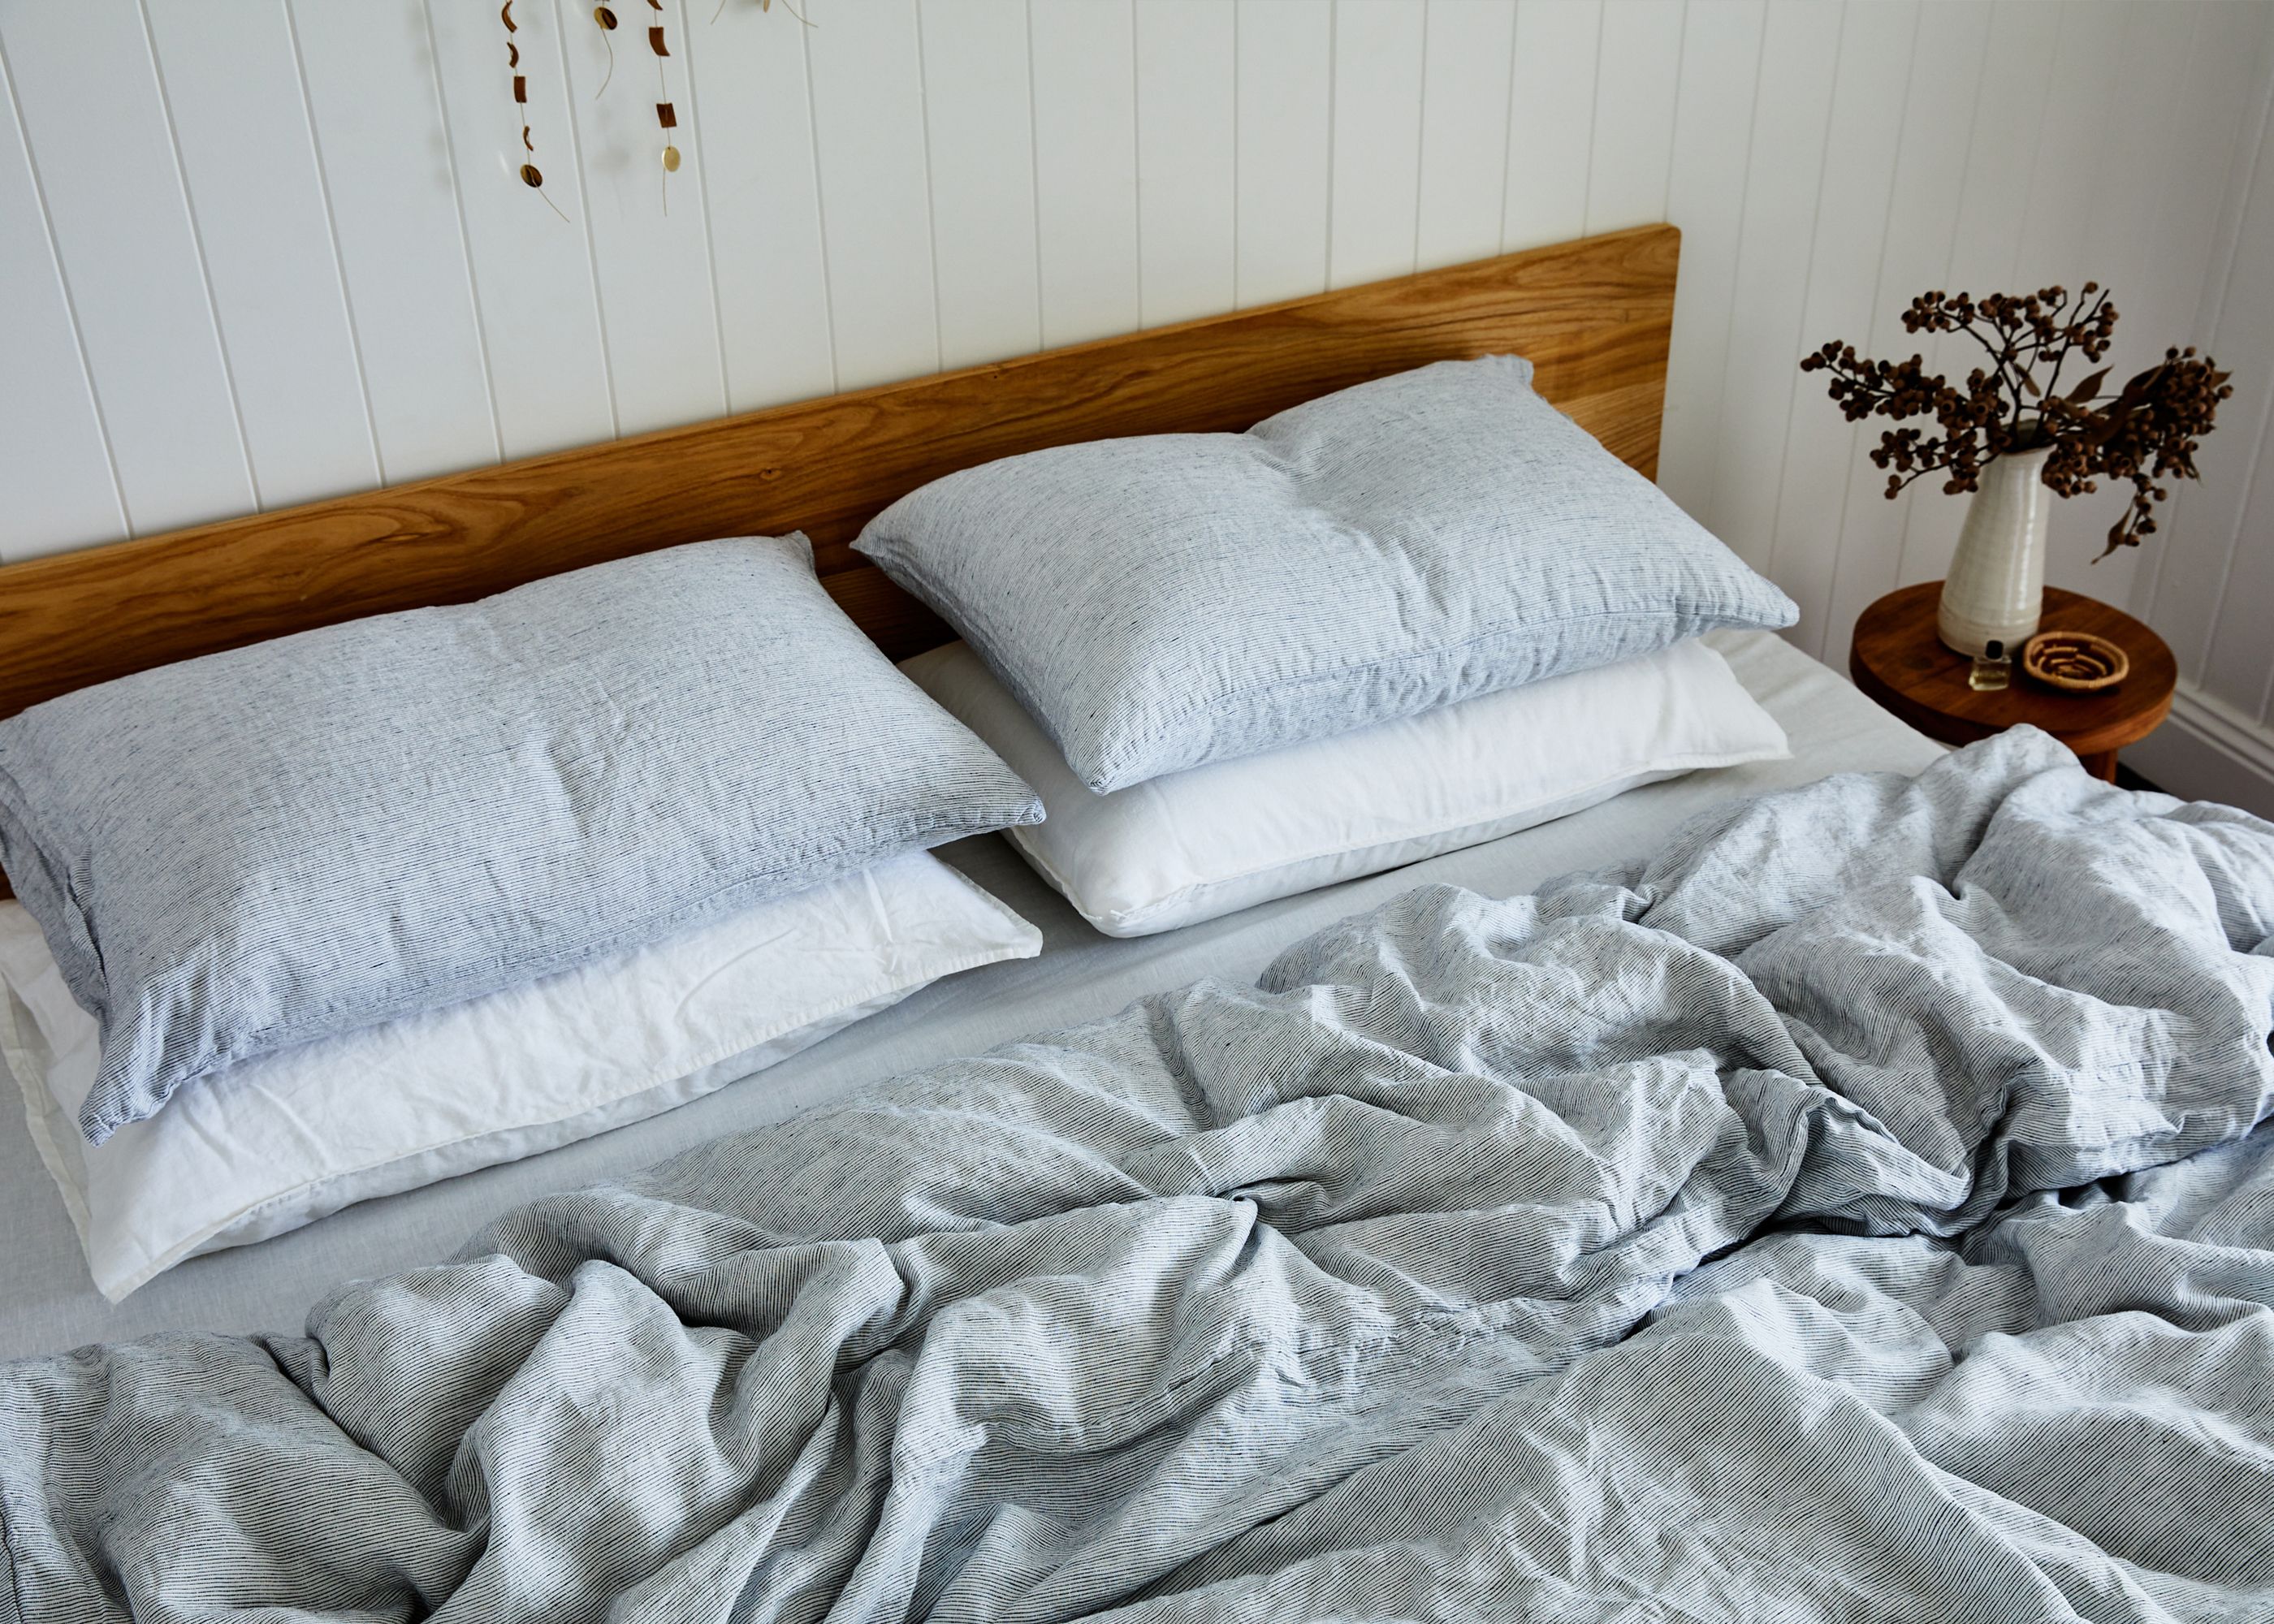 Pinstripe and white linen bedding